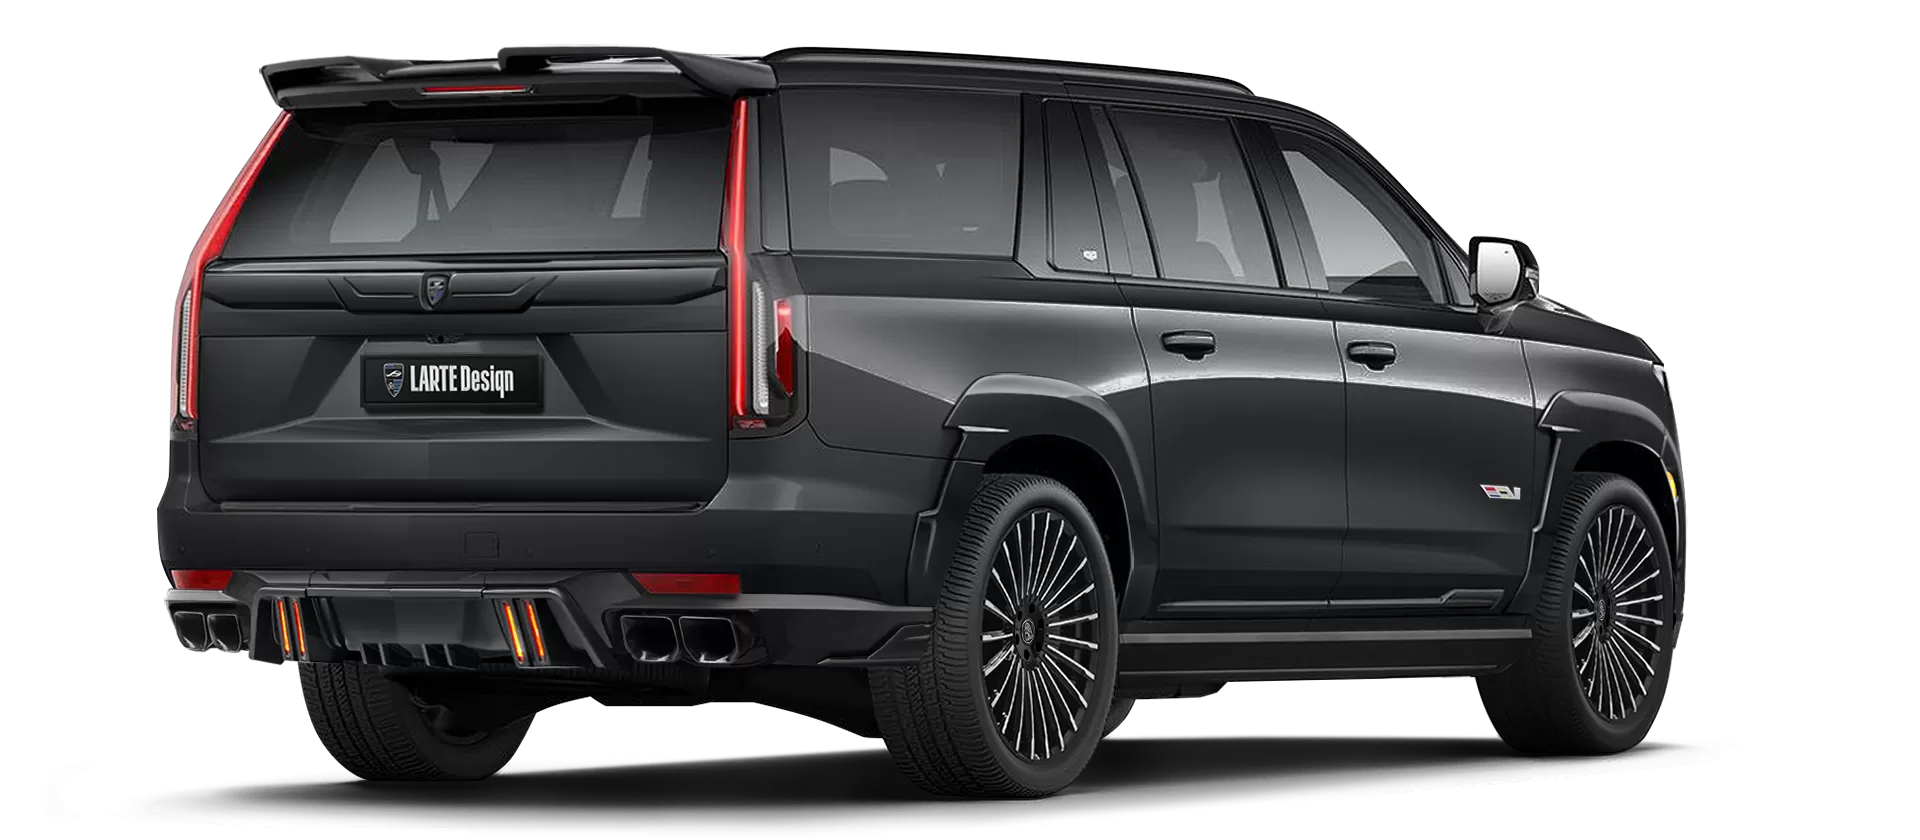 Cadillac Escalade-V / V-ESV with painted body kit: rear view shown in Black Raven